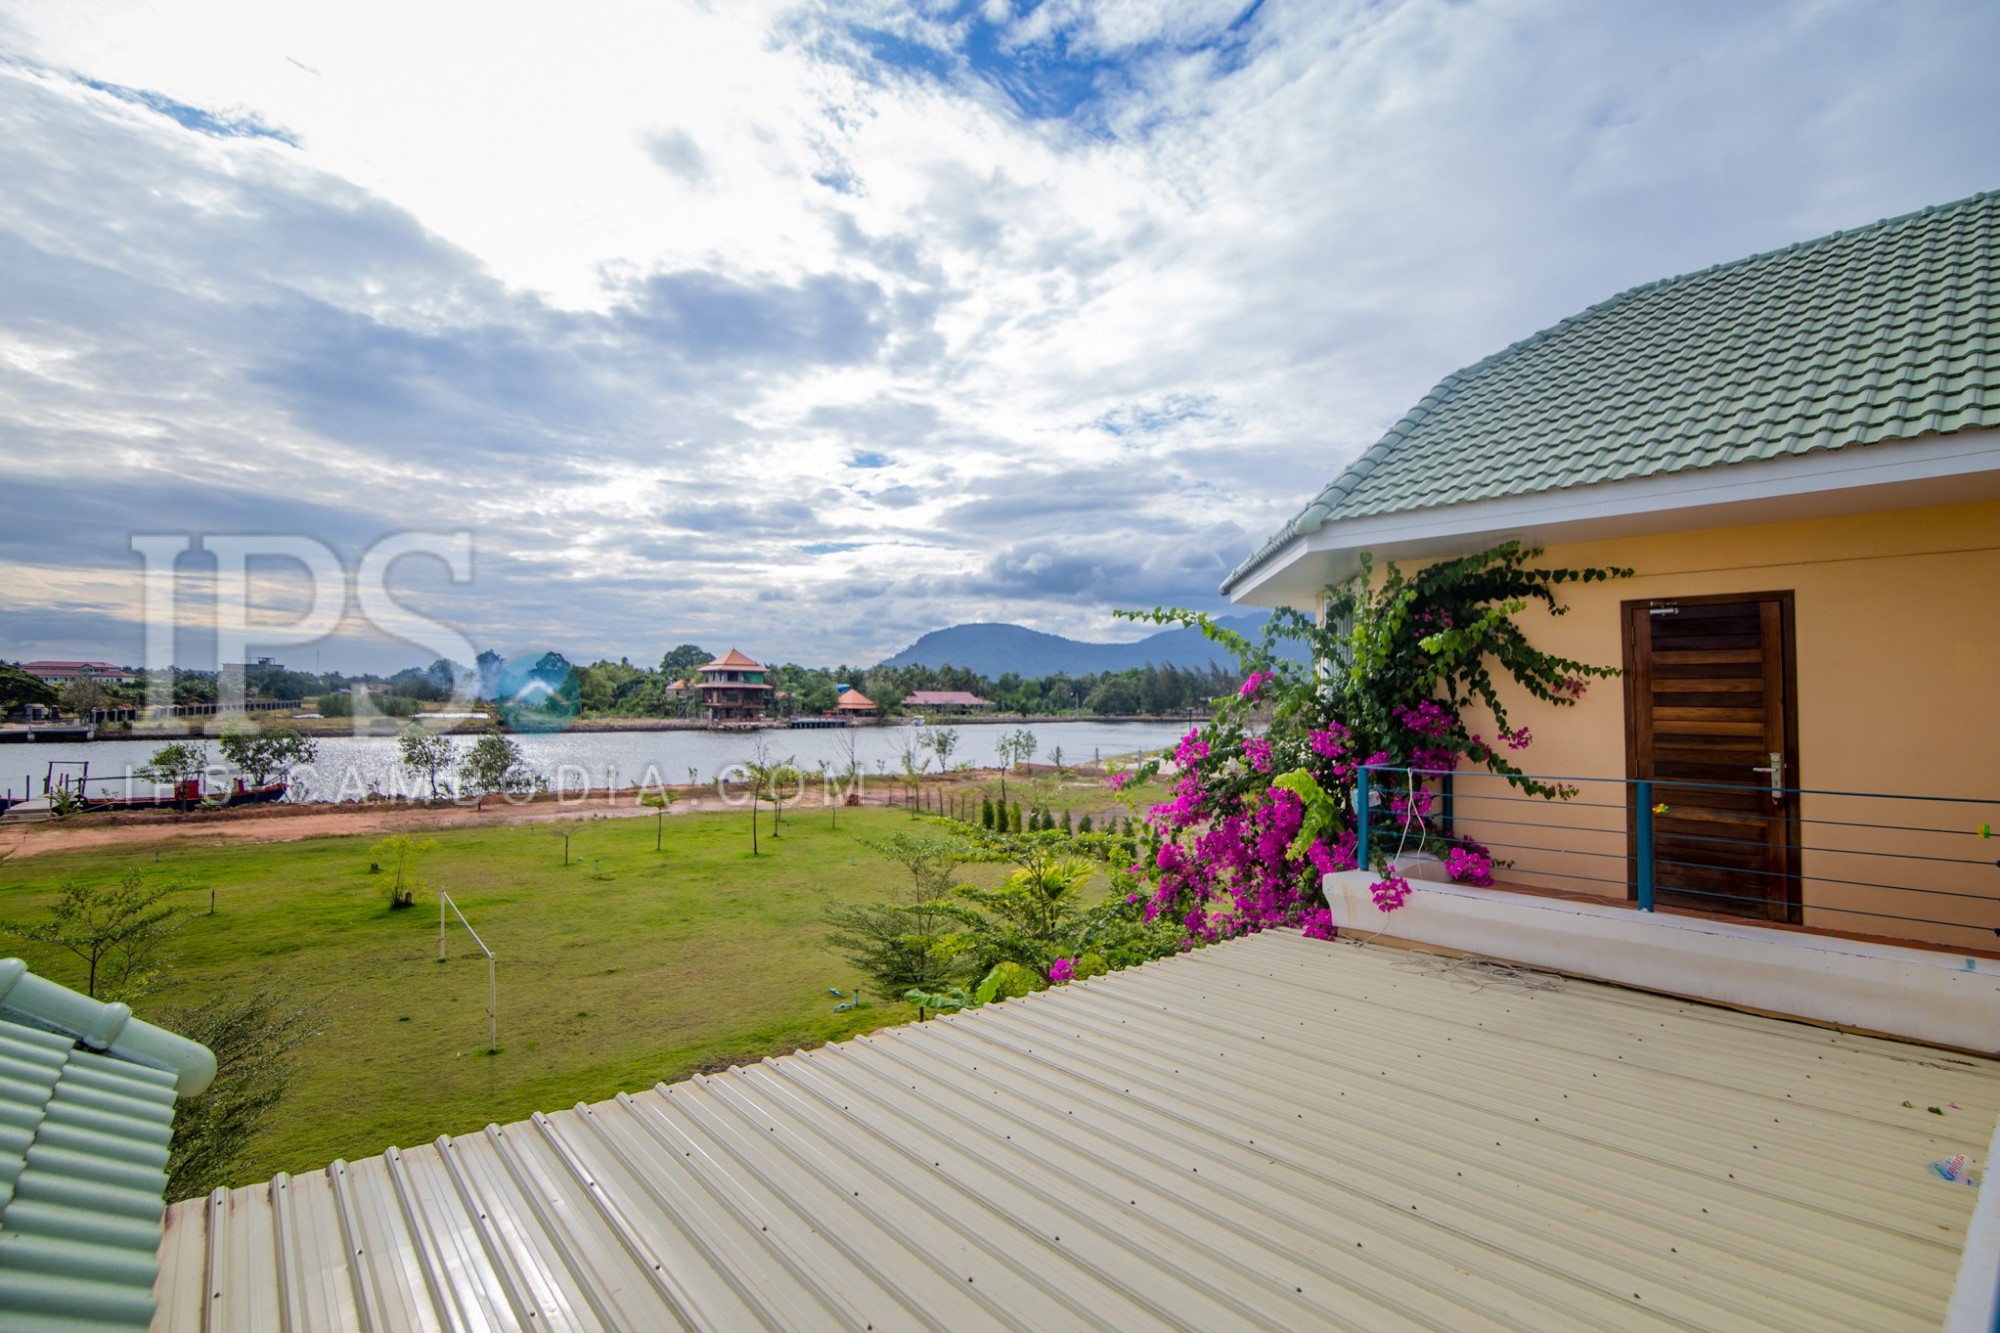 6186 Sqm River Front Property For Sale Kampot Province 10769 | IPS Cambodia